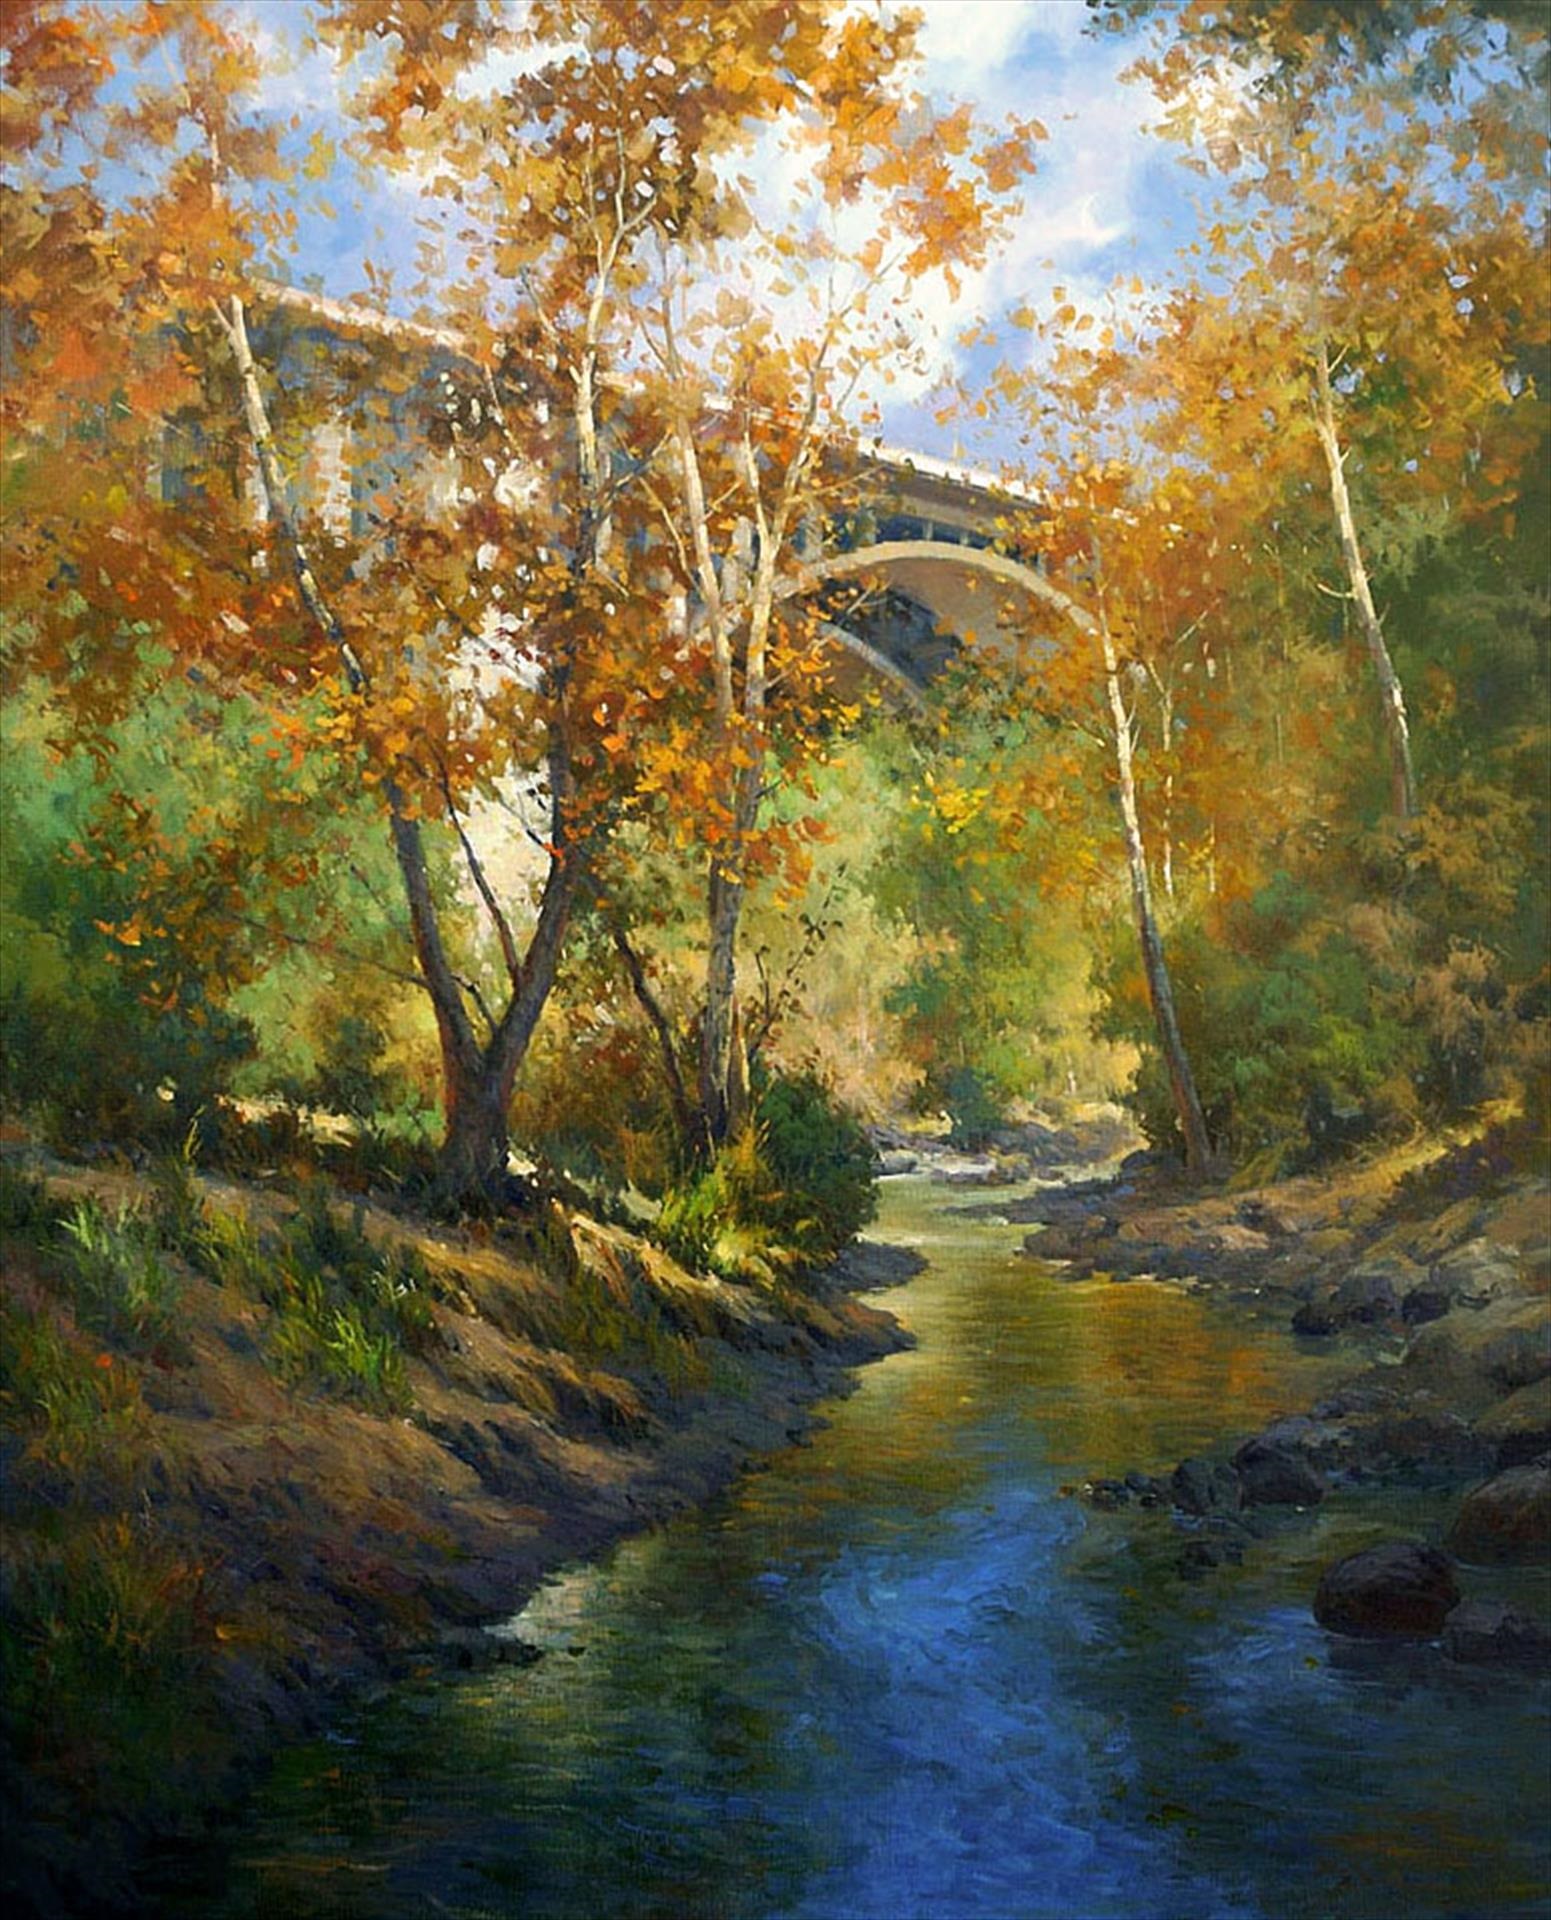 Junn Roca, “Golden Afternoon,” Oil on linen, 48 x 40 inches, Collection of the Artist